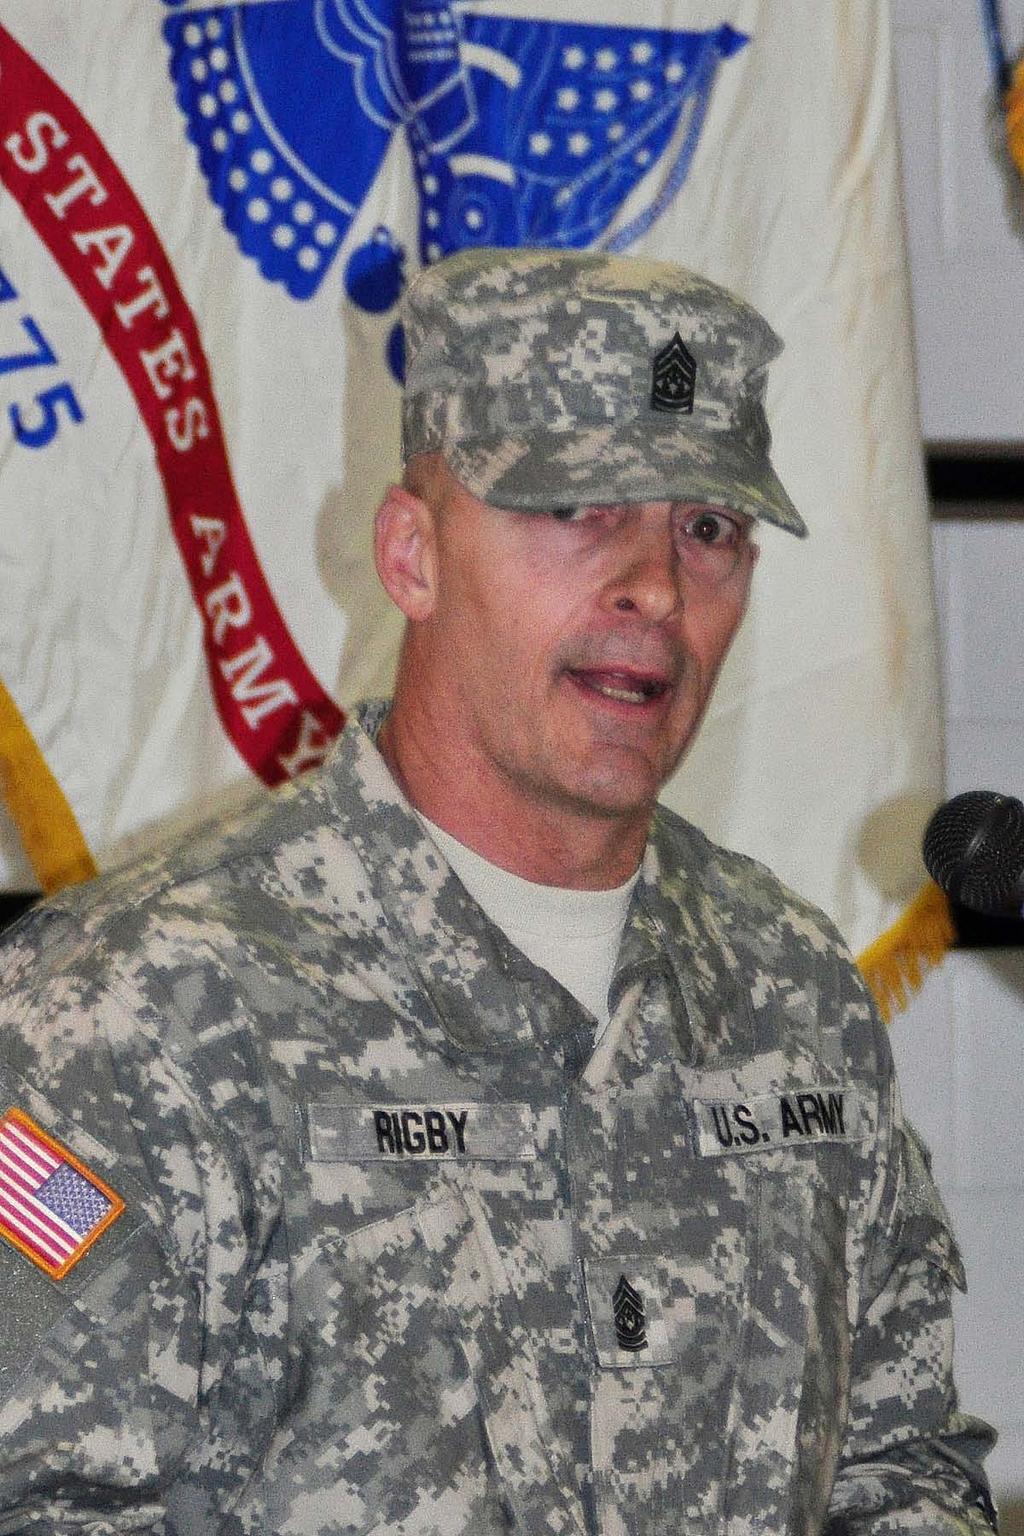 Todd Berger, commander, during a Change of Responsibility ceremony at the Somerset Armory May 5, 2013.